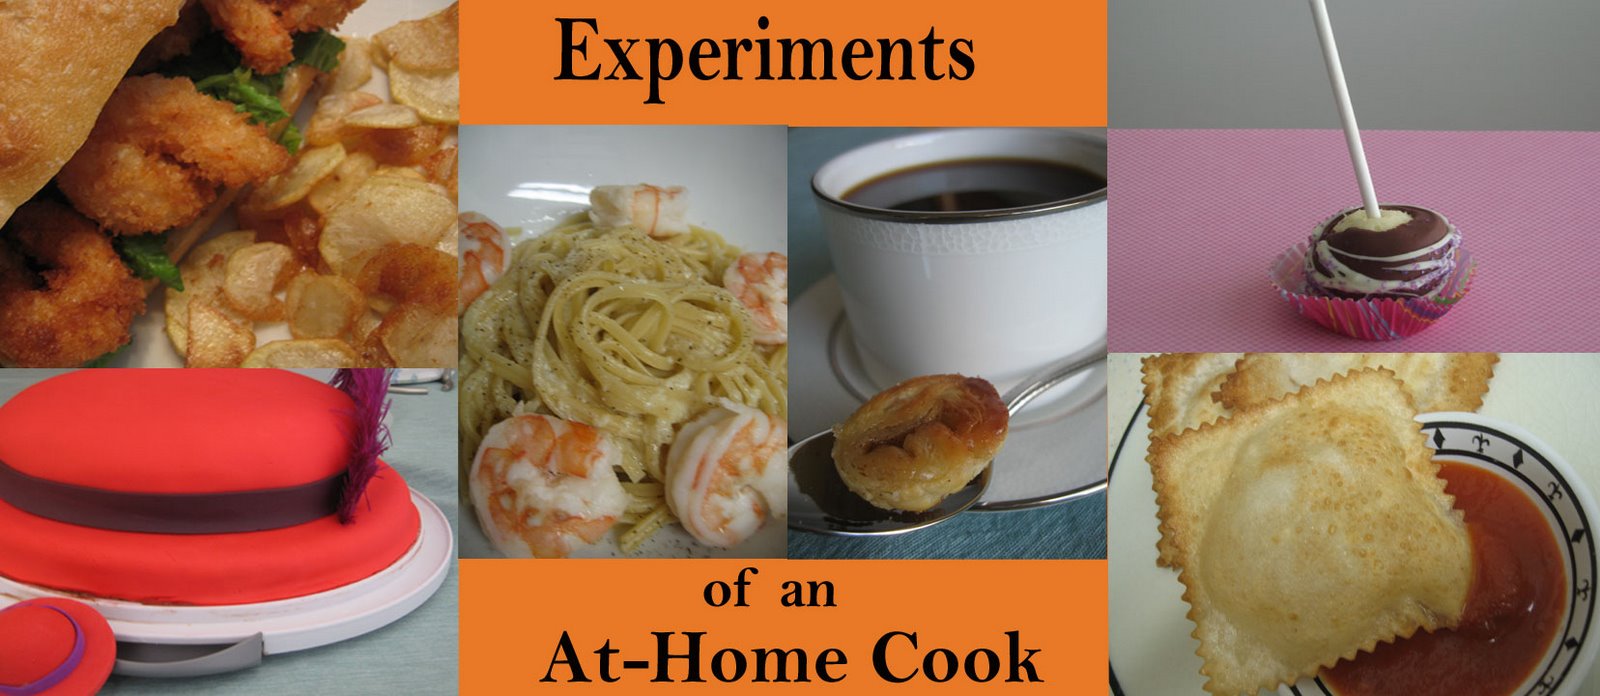 Experiments of an at-home cook